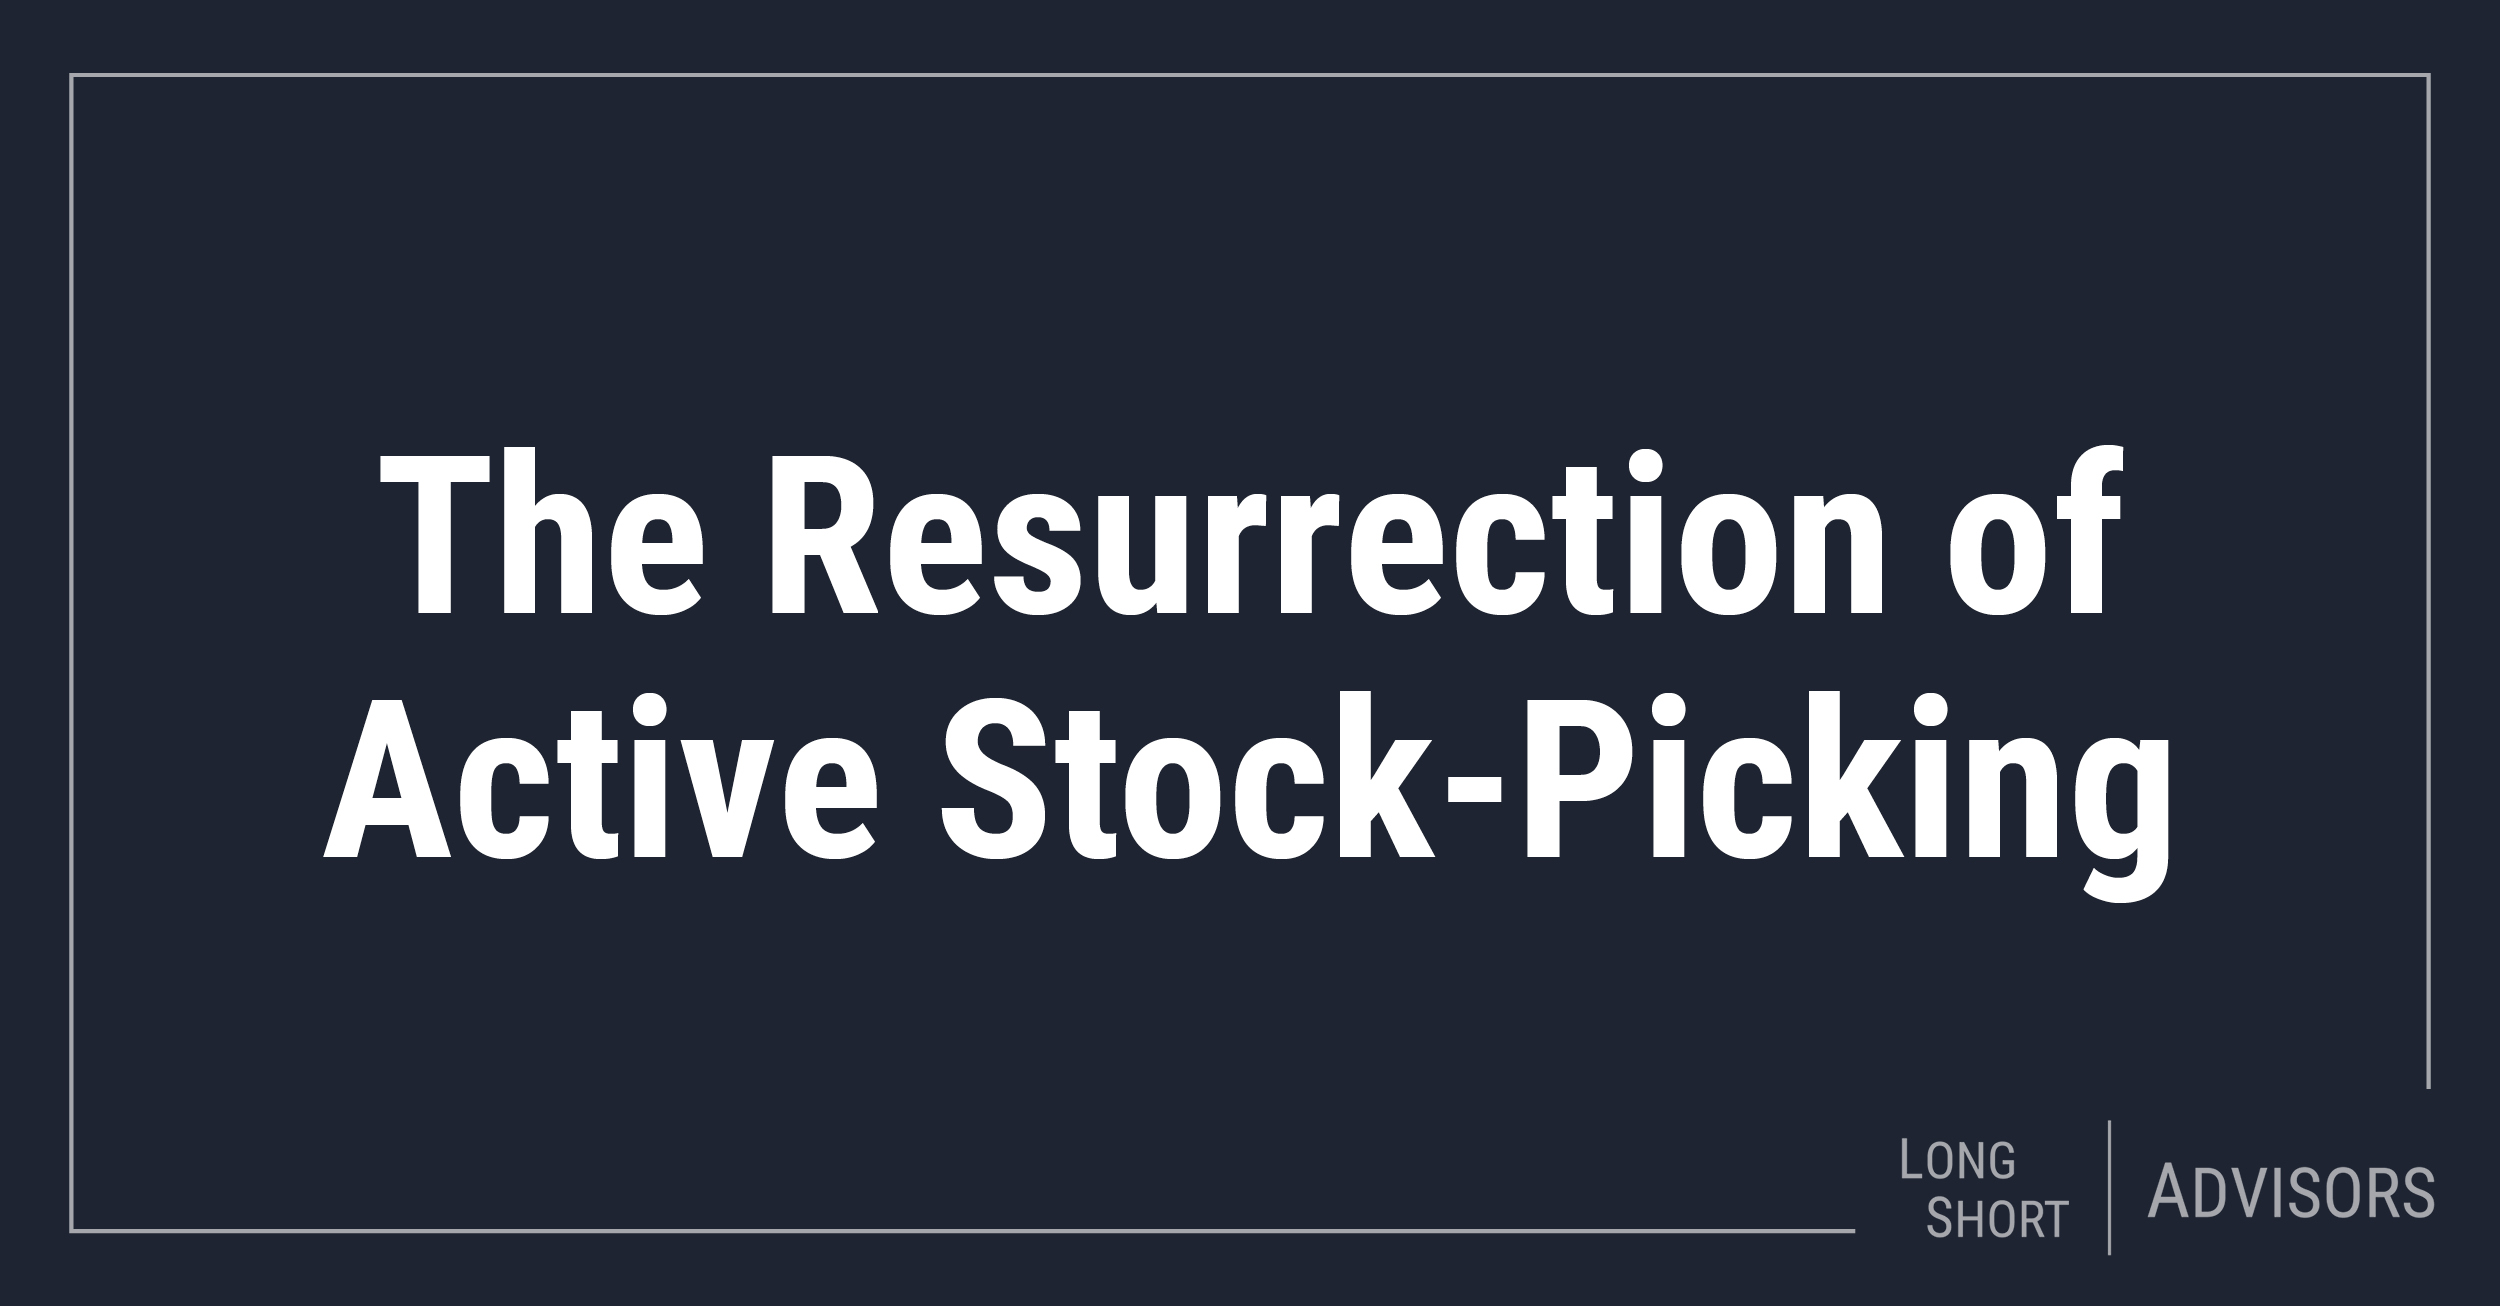 The Resurrection of Active Stock-Picking